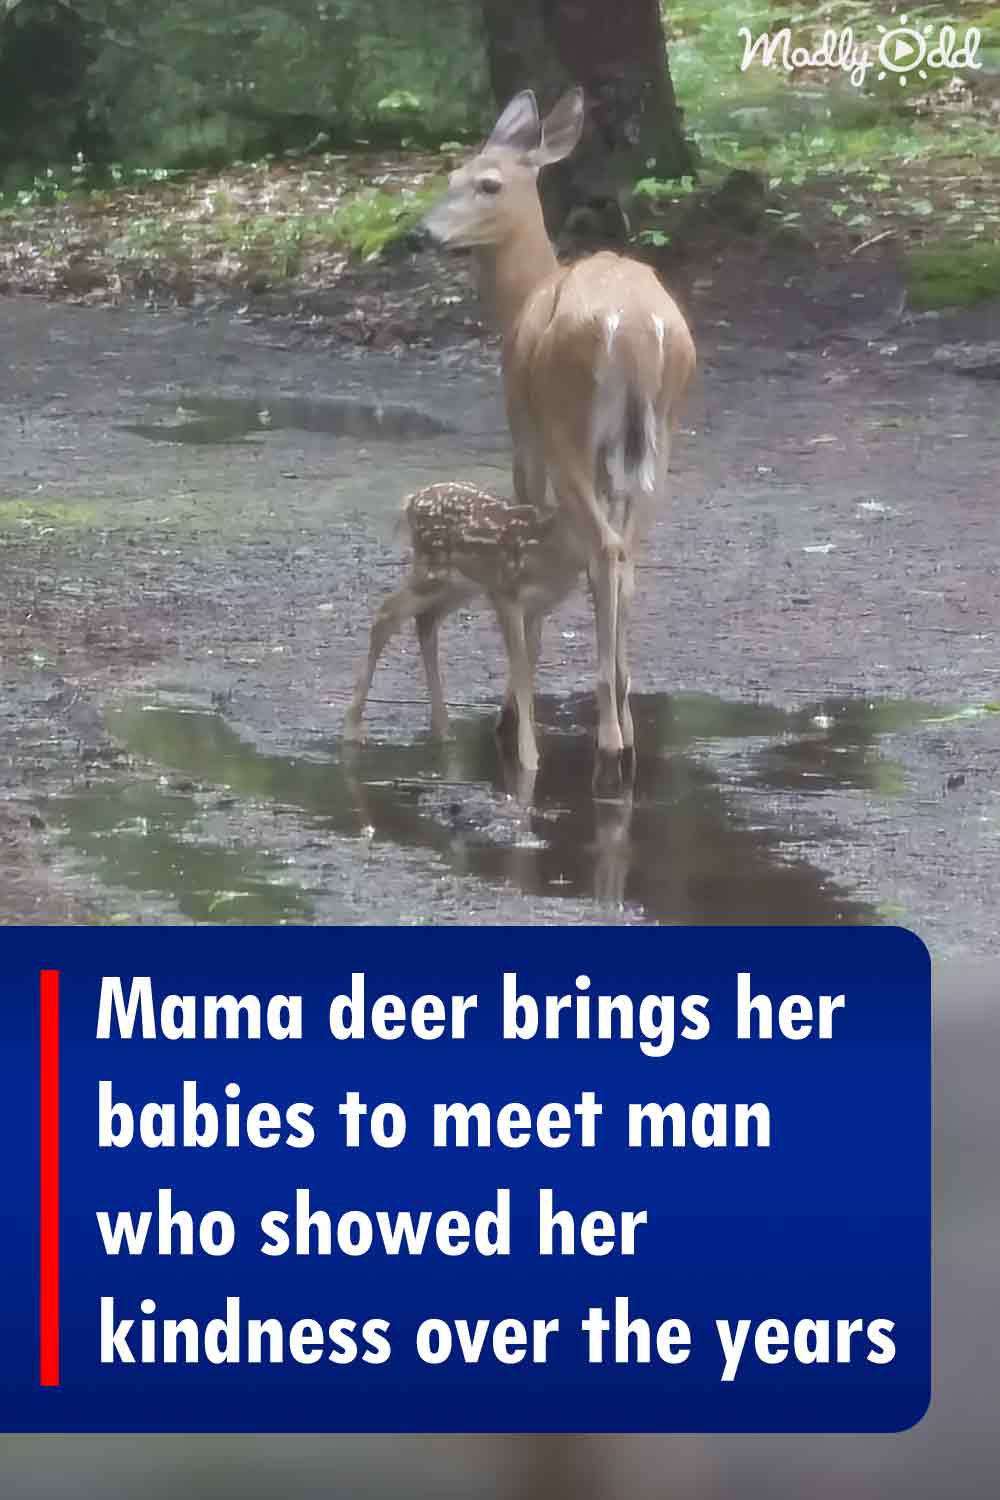 Mama deer brings her babies to meet man who showed her kindness over the years